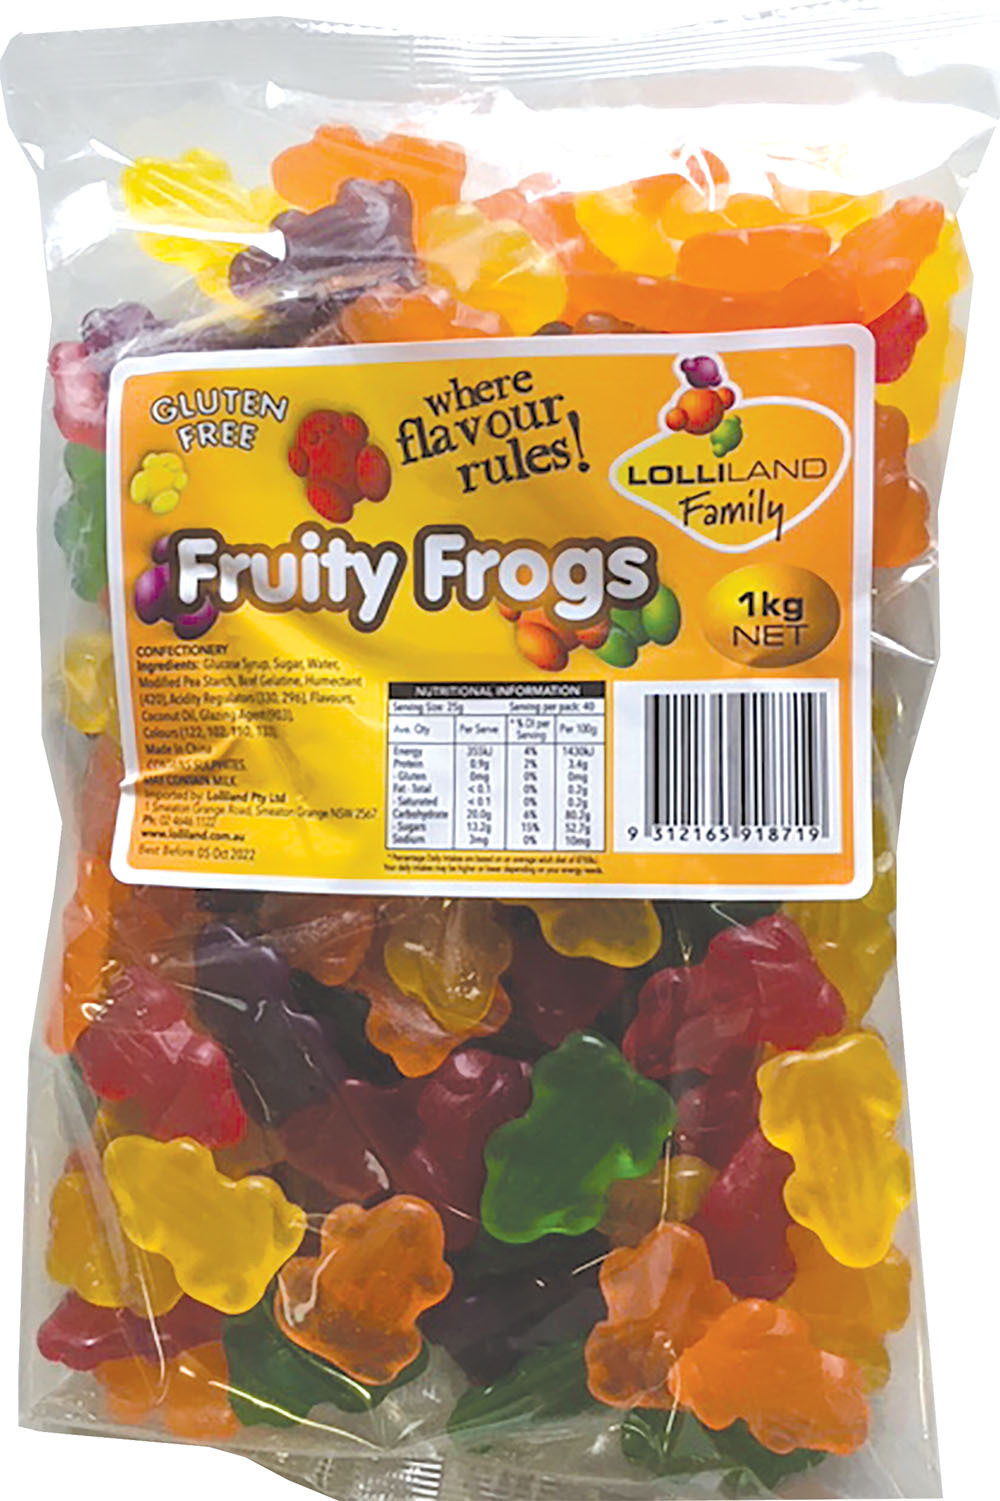 Fruity Frogs - Mixed colours - Gluten Free - 1kg